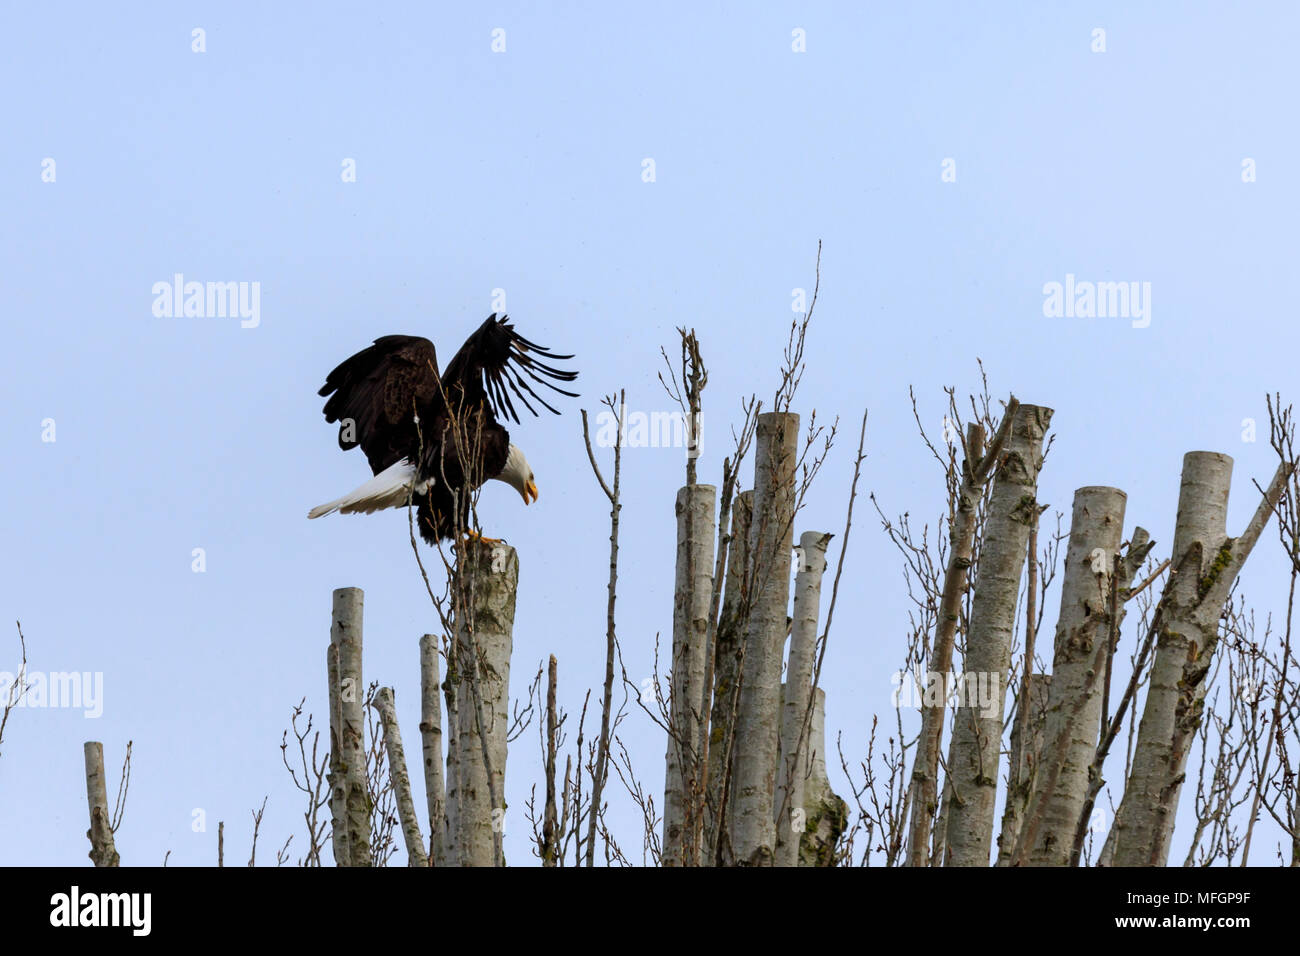 Bald Eagle with talons out stretched preparing to land on top of a tree branch Stock Photo